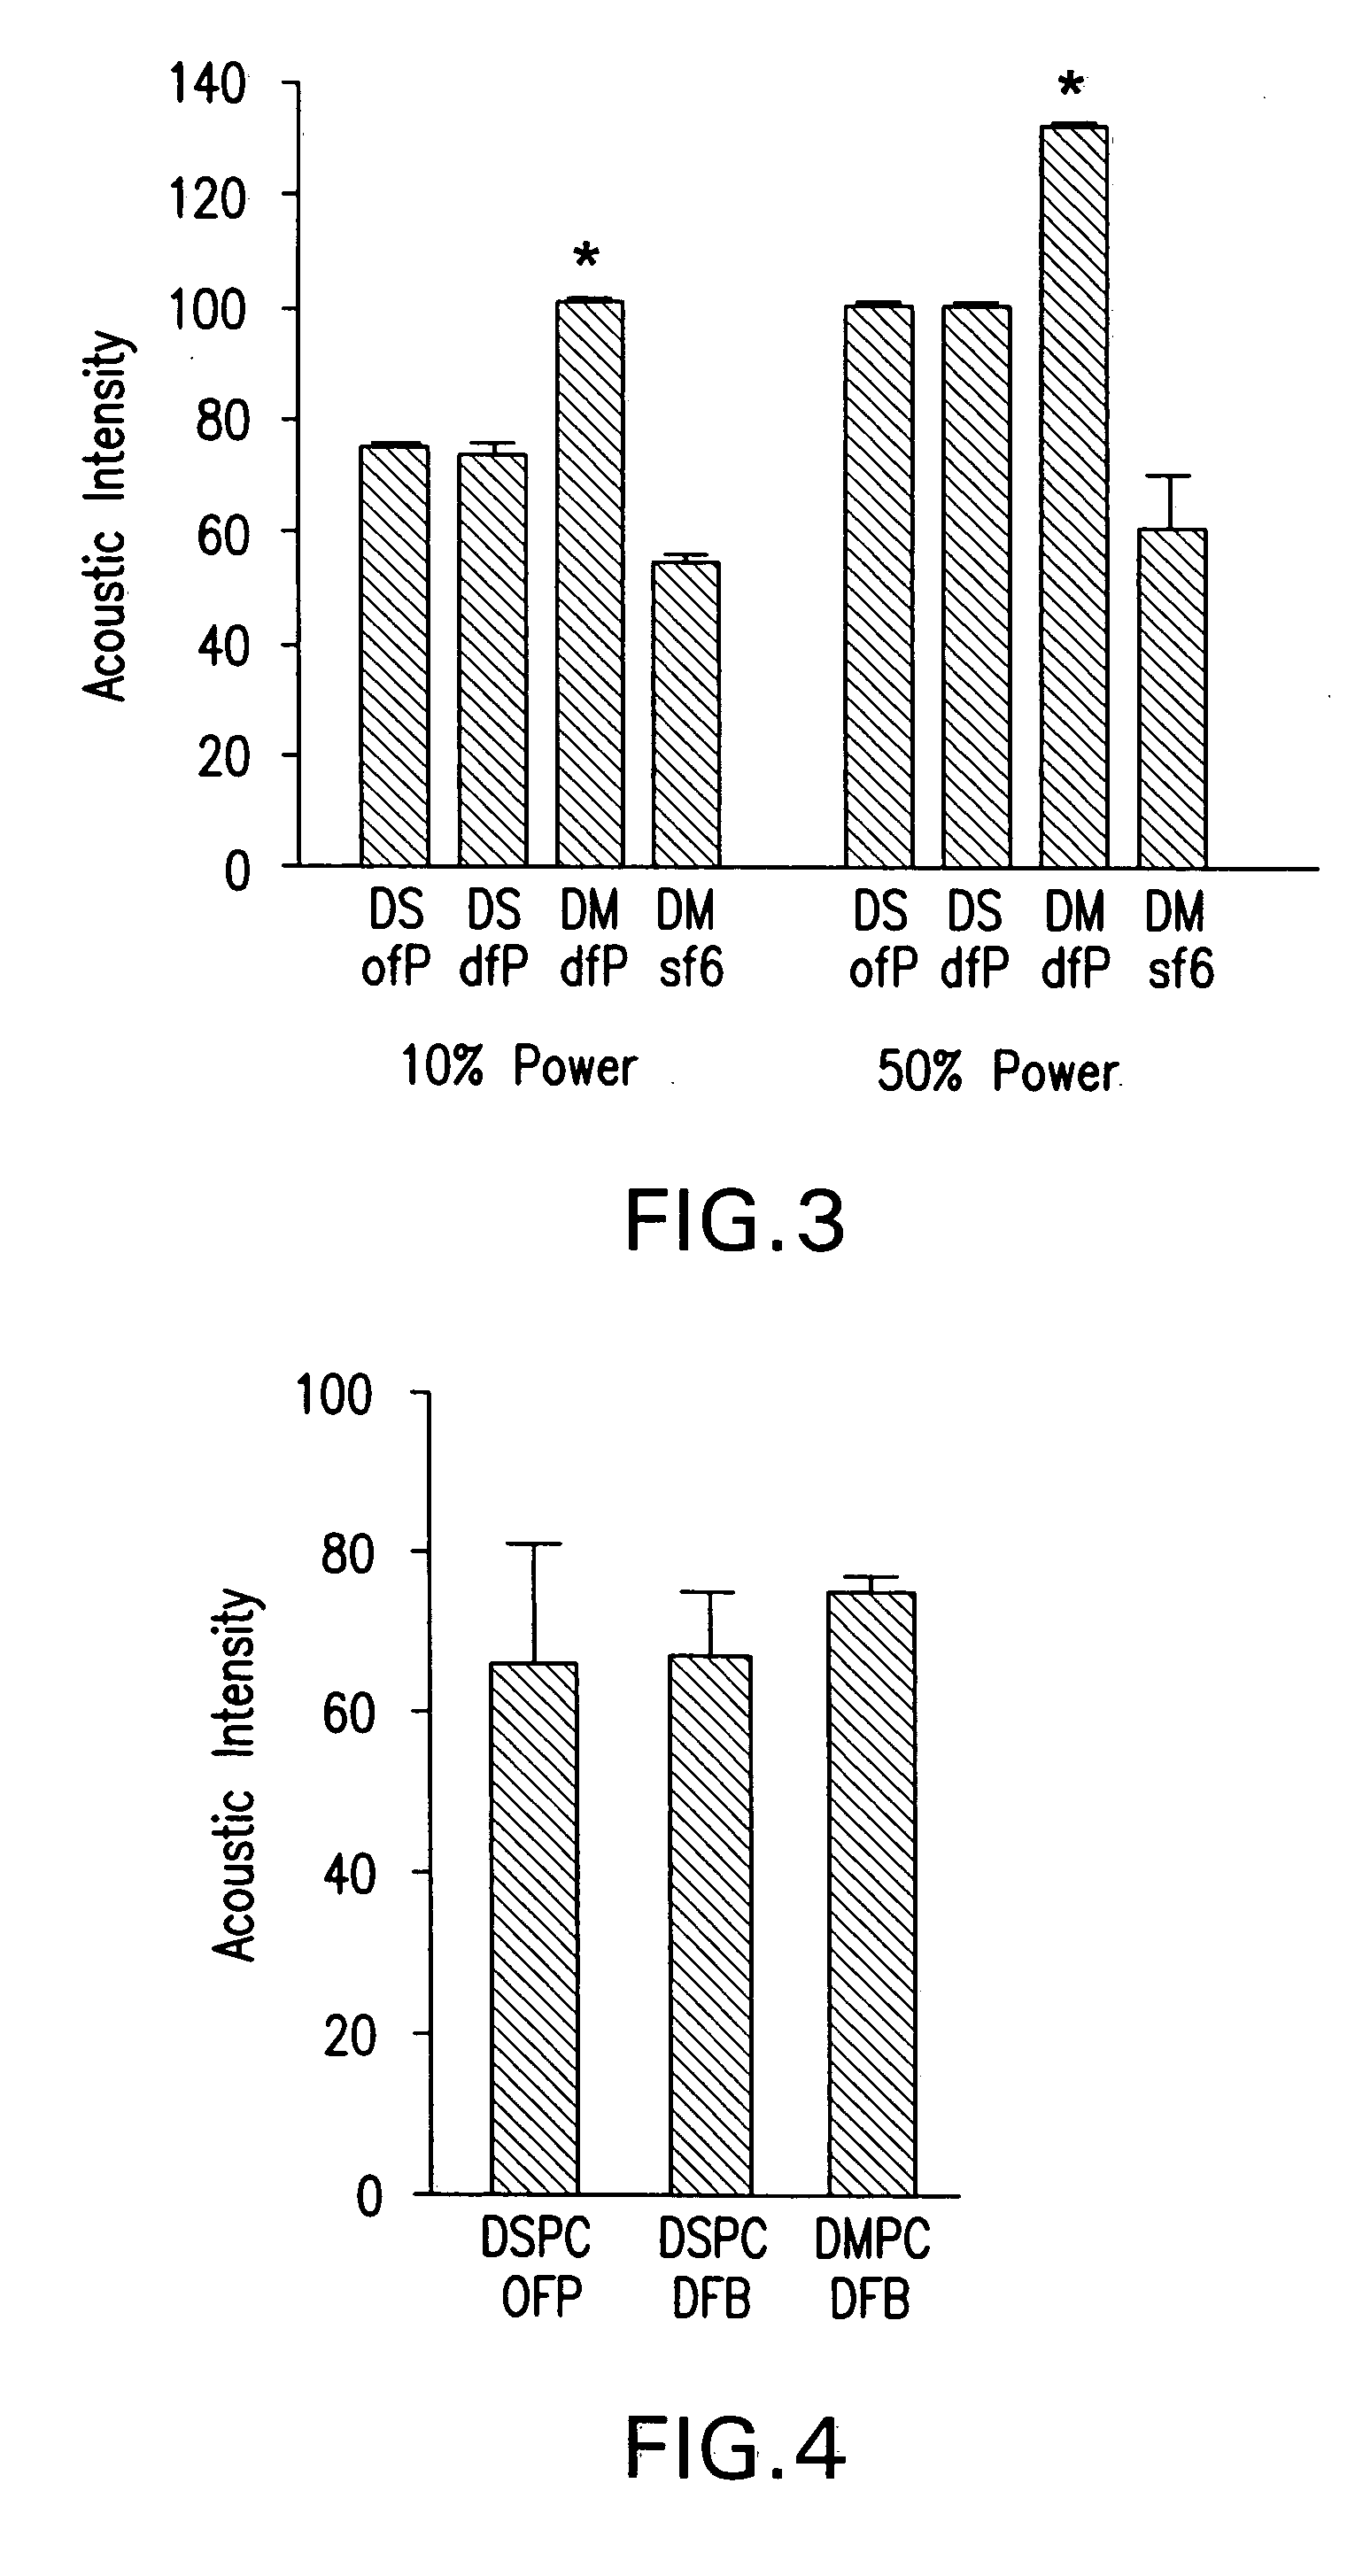 Deposit contrast agents and related methods thereof